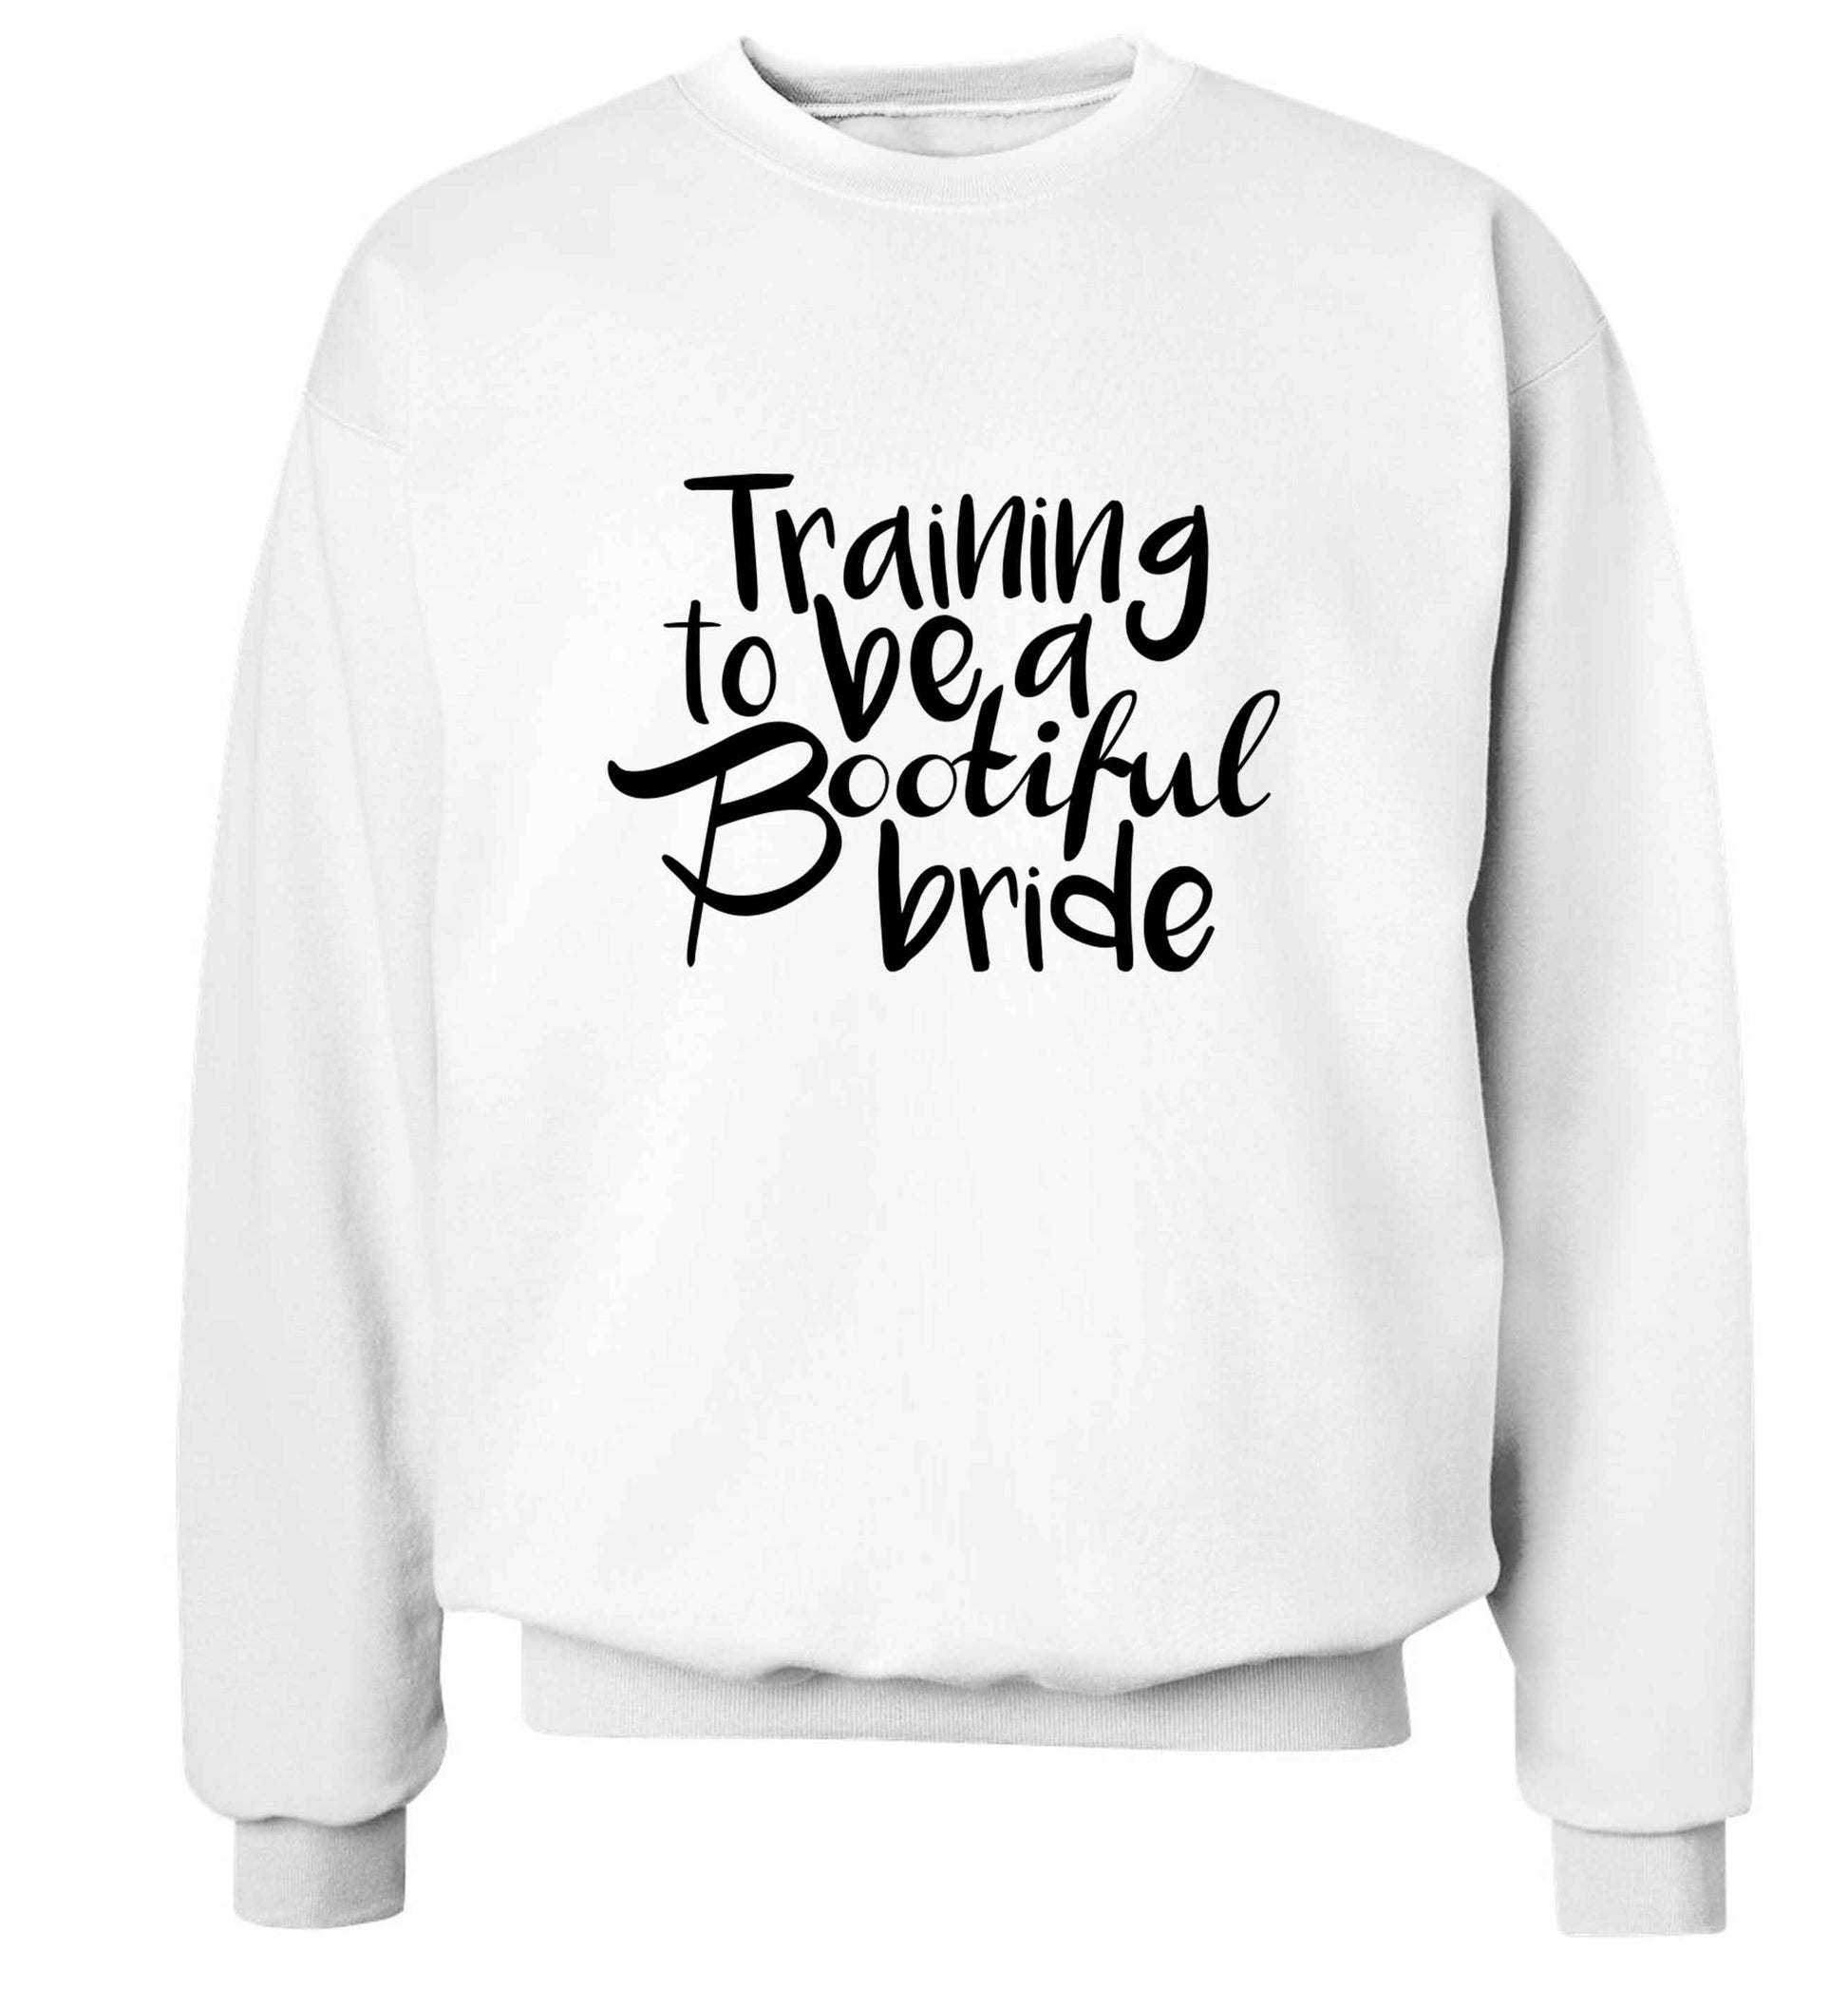 Get motivated and get fit for your big day! Our workout quotes and designs will get you ready to sweat! Perfect for any bride, groom or bridesmaid to be!  adult's unisex white sweater 2XL